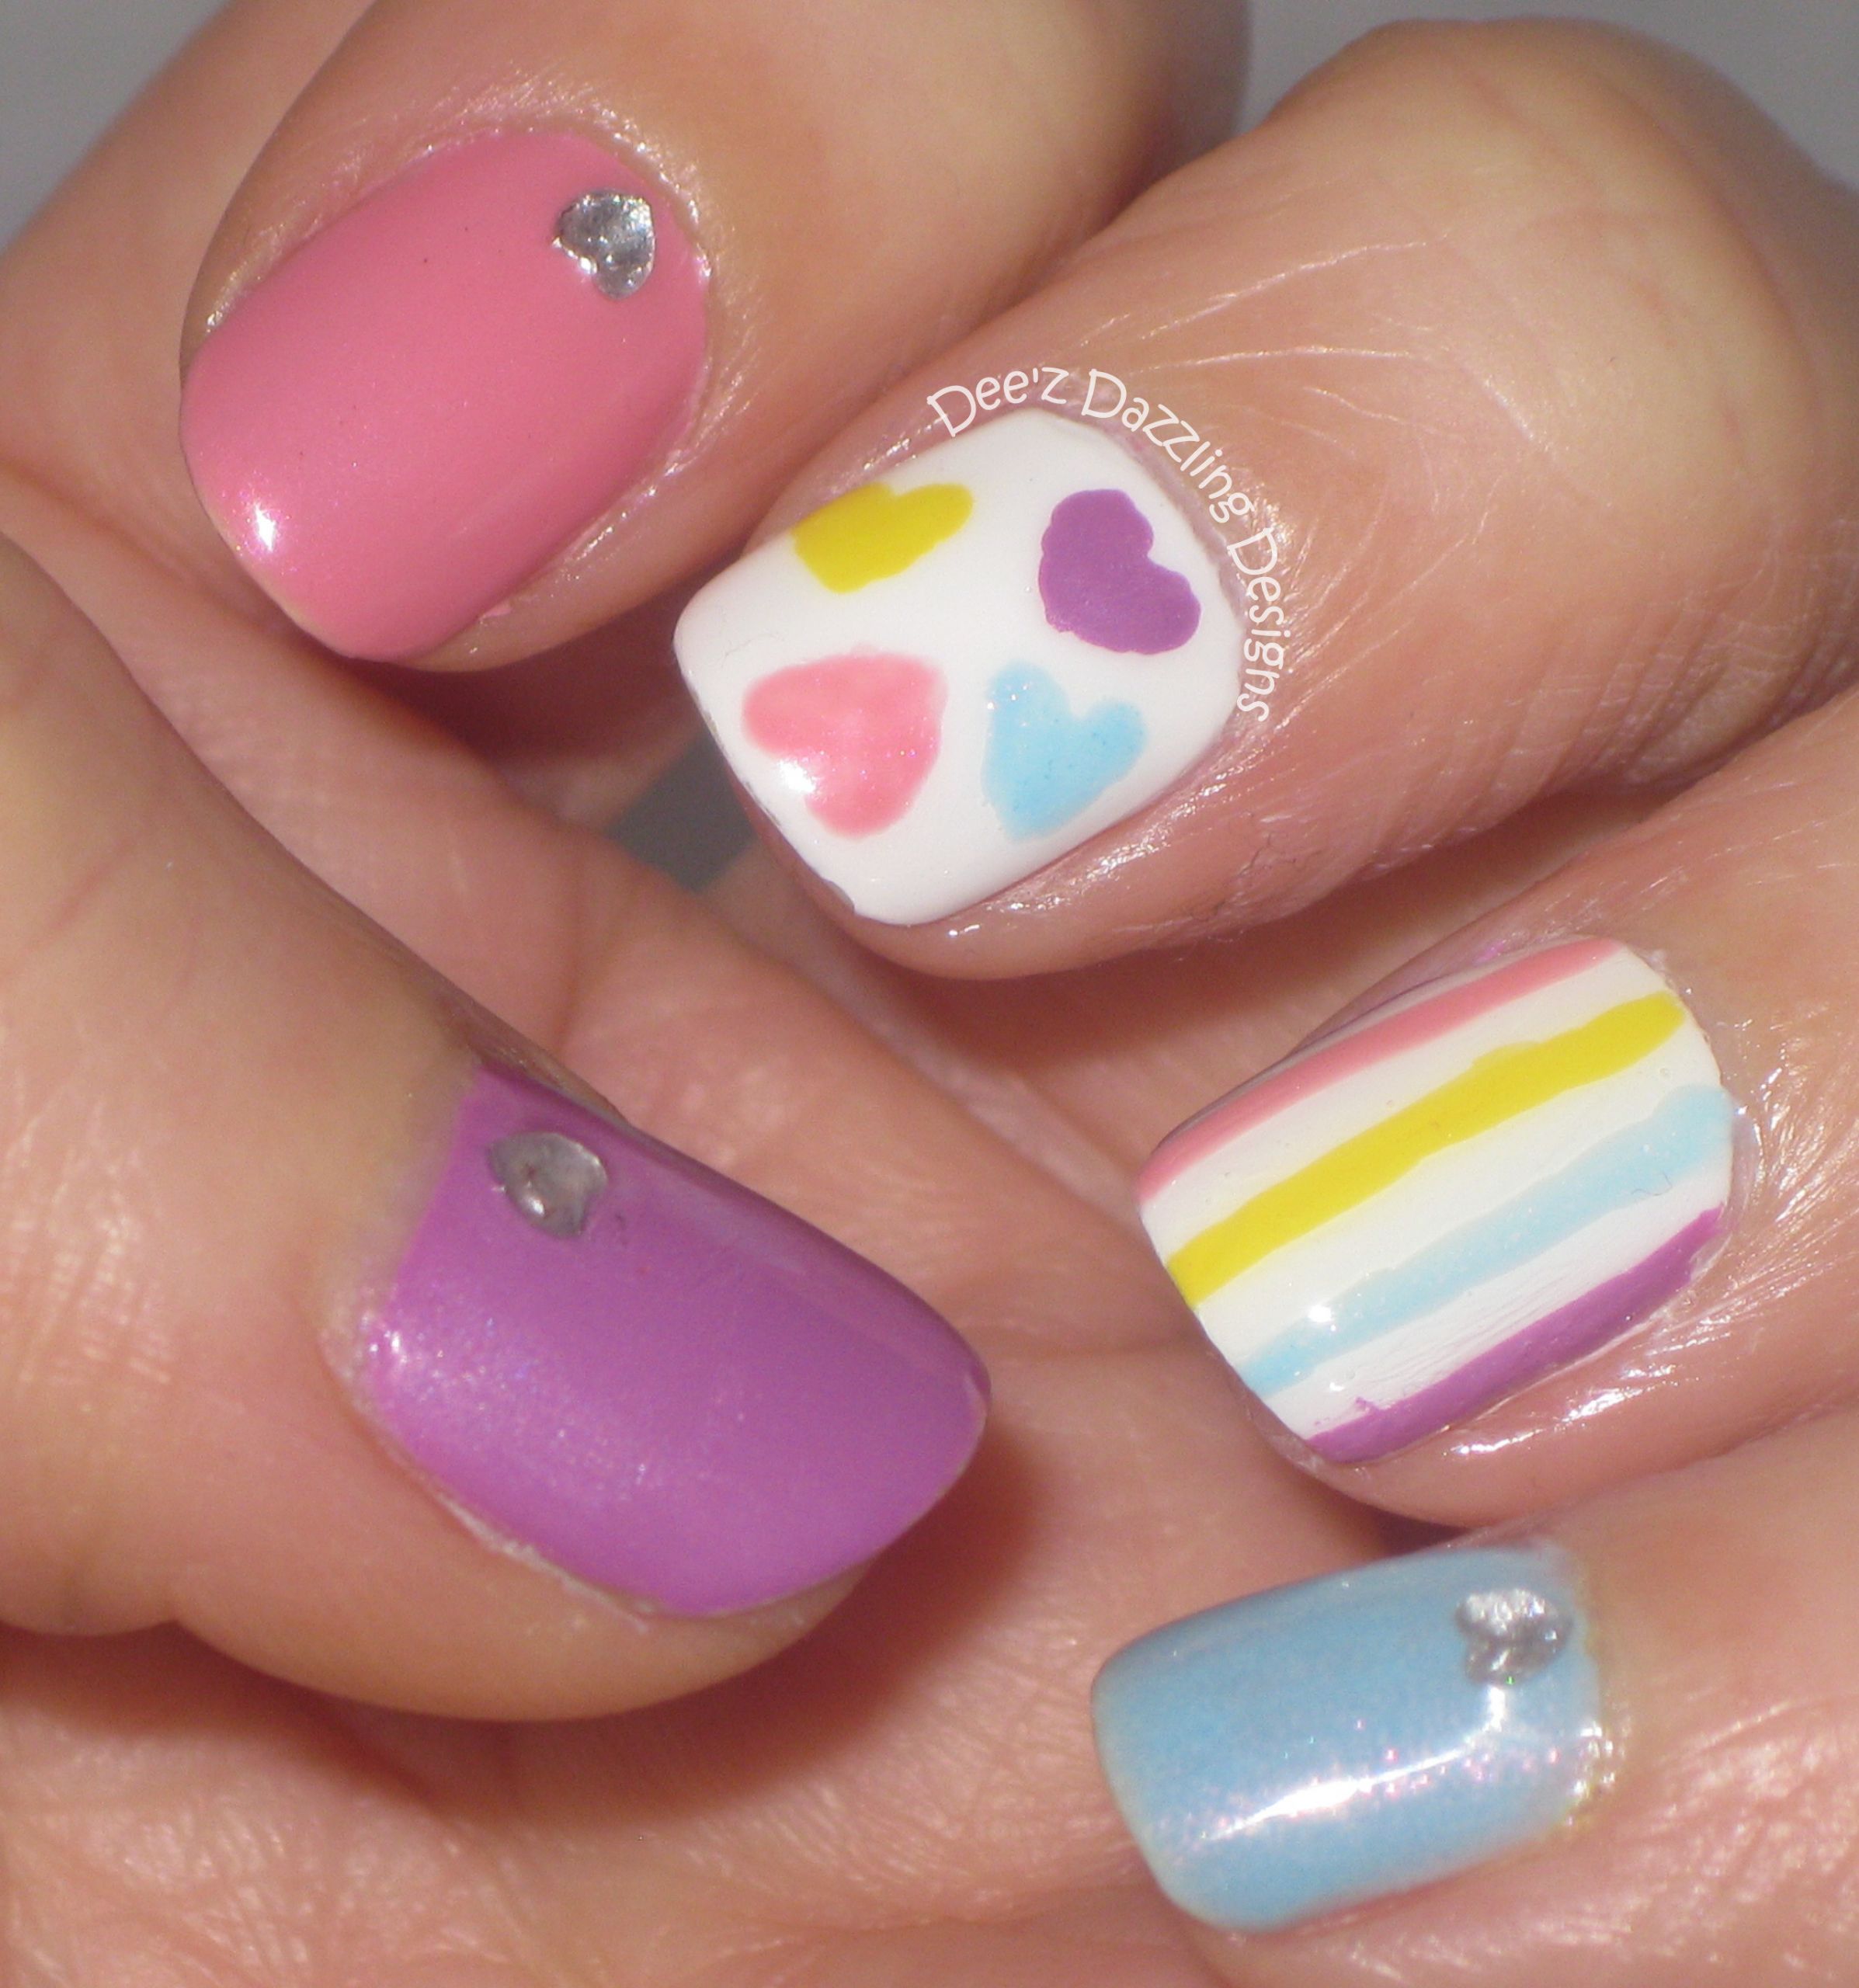 February Nail Designs
 February Nail Art Challenge Pastel – Dee s Dabblings